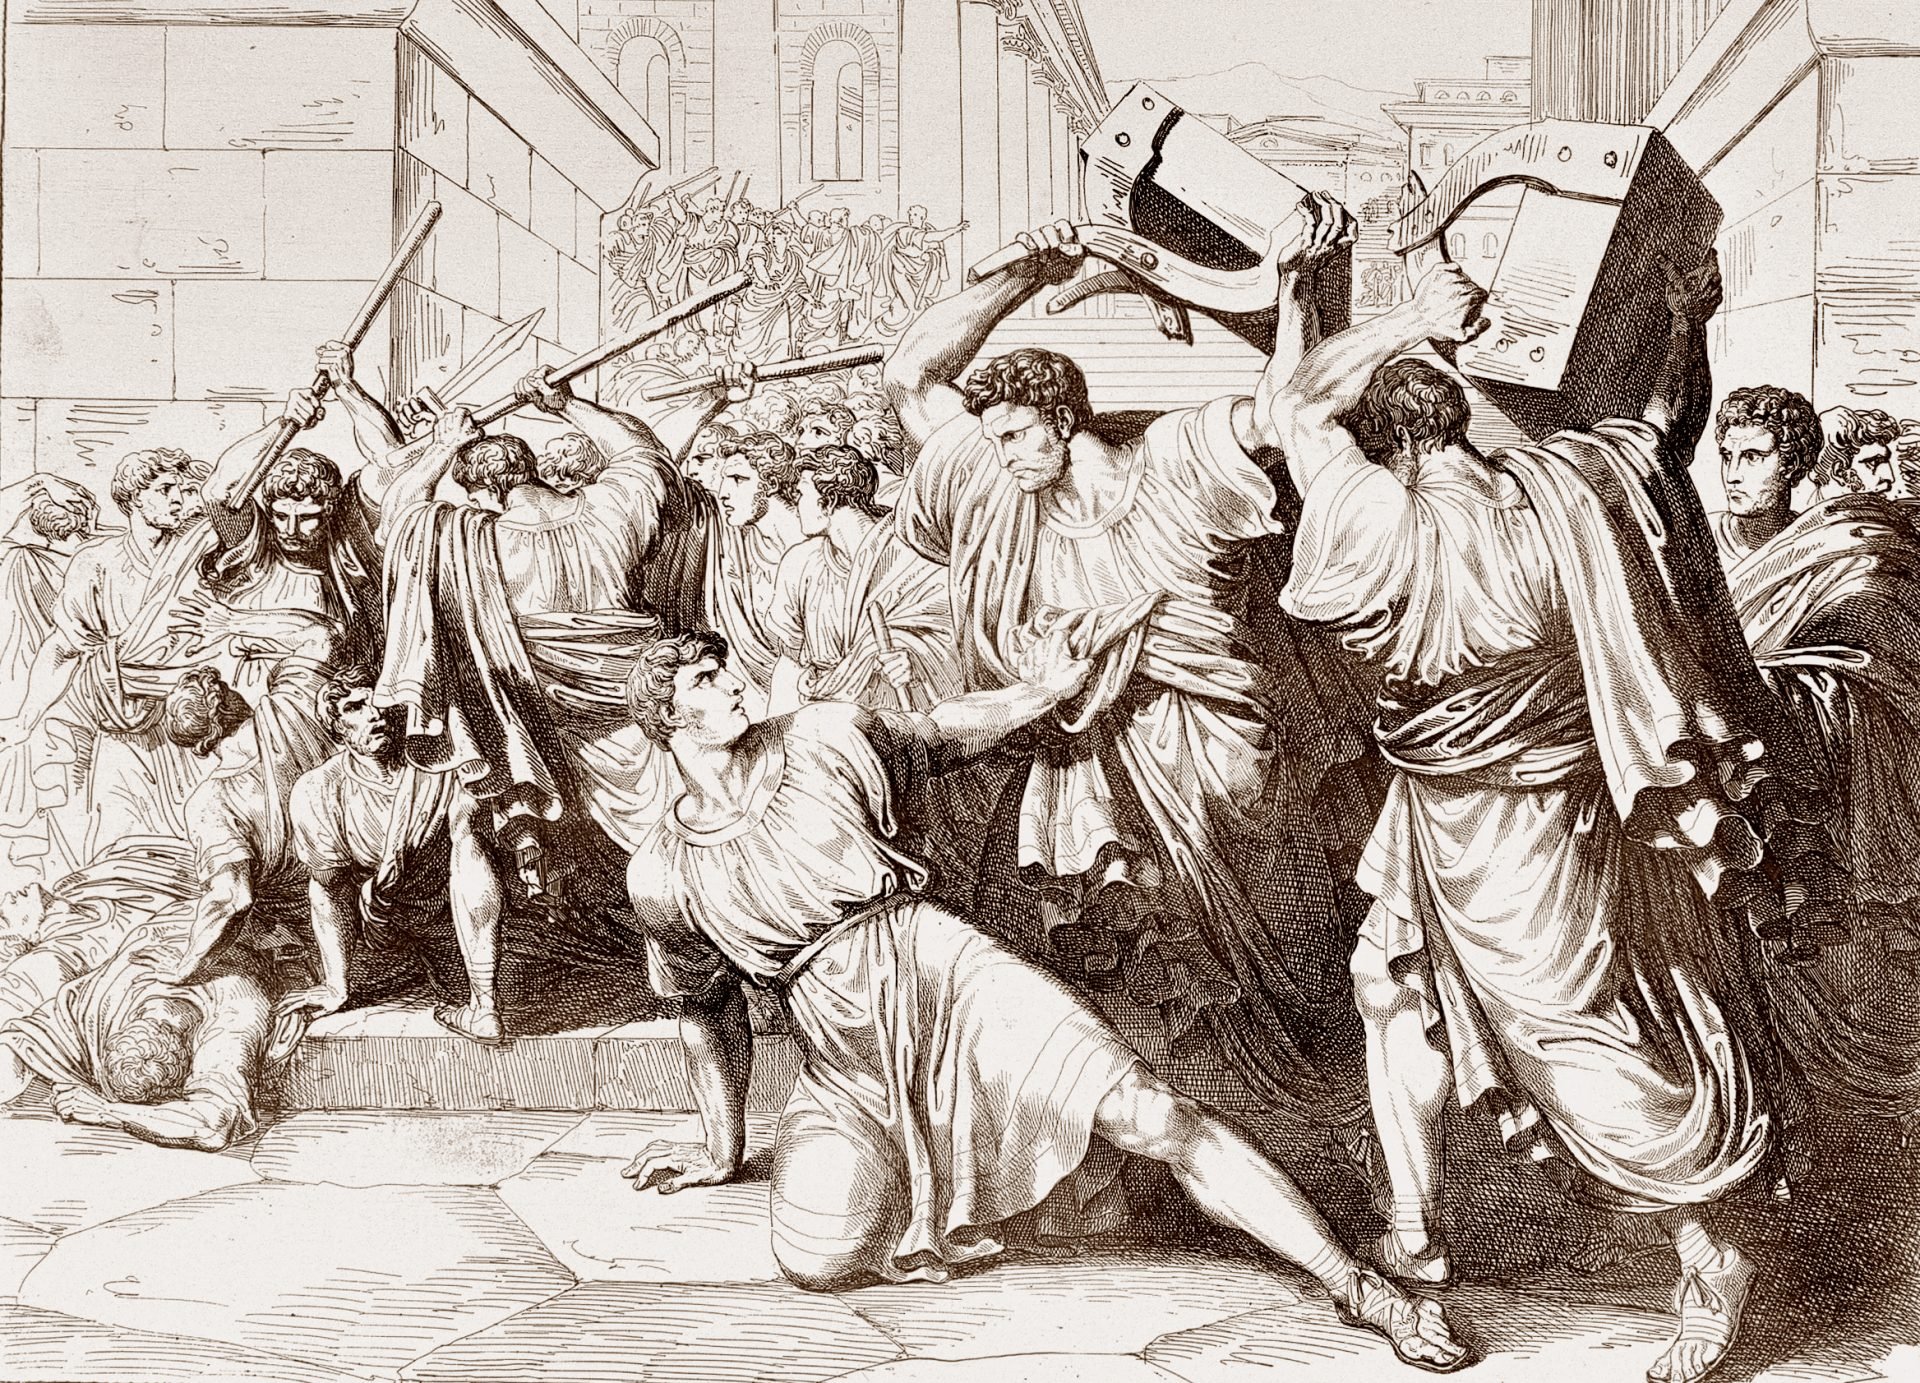 A black and white illustration of a group of people in ancient Roman clothing fighting with sticks and heavy objects in front of a building with columns and a statue.